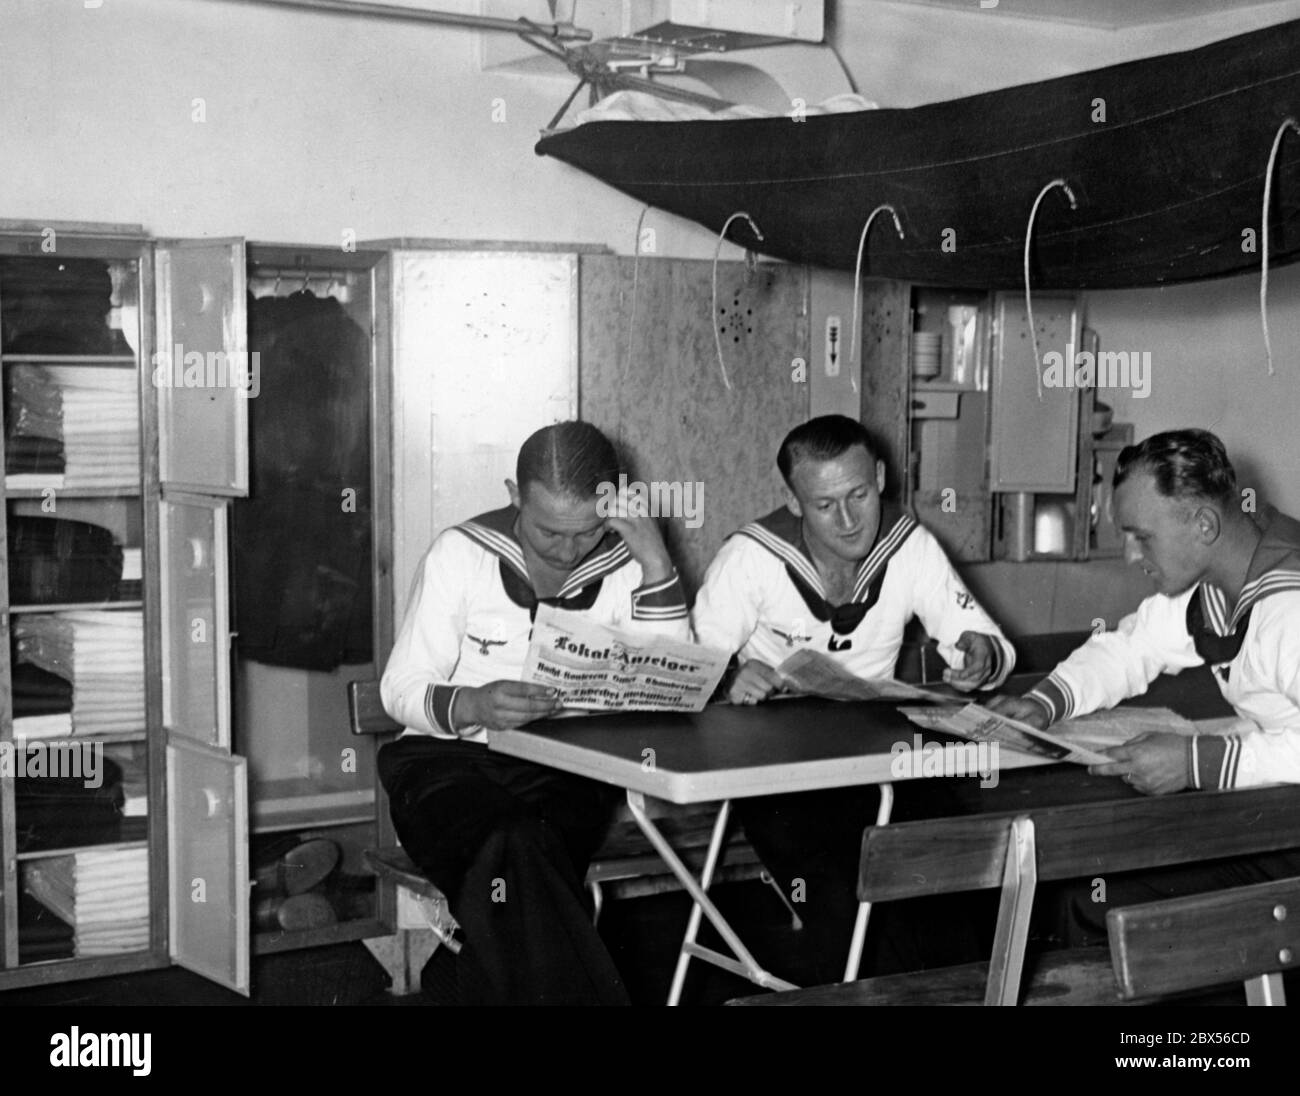 At the exhibition 'Gesundes Leben - Frohes Schaffen' ( Healthy Life - Glad Work) is displayed a crew room in a warship where sailors can read newspapers like the Lokal-Anzeiger. Stock Photo